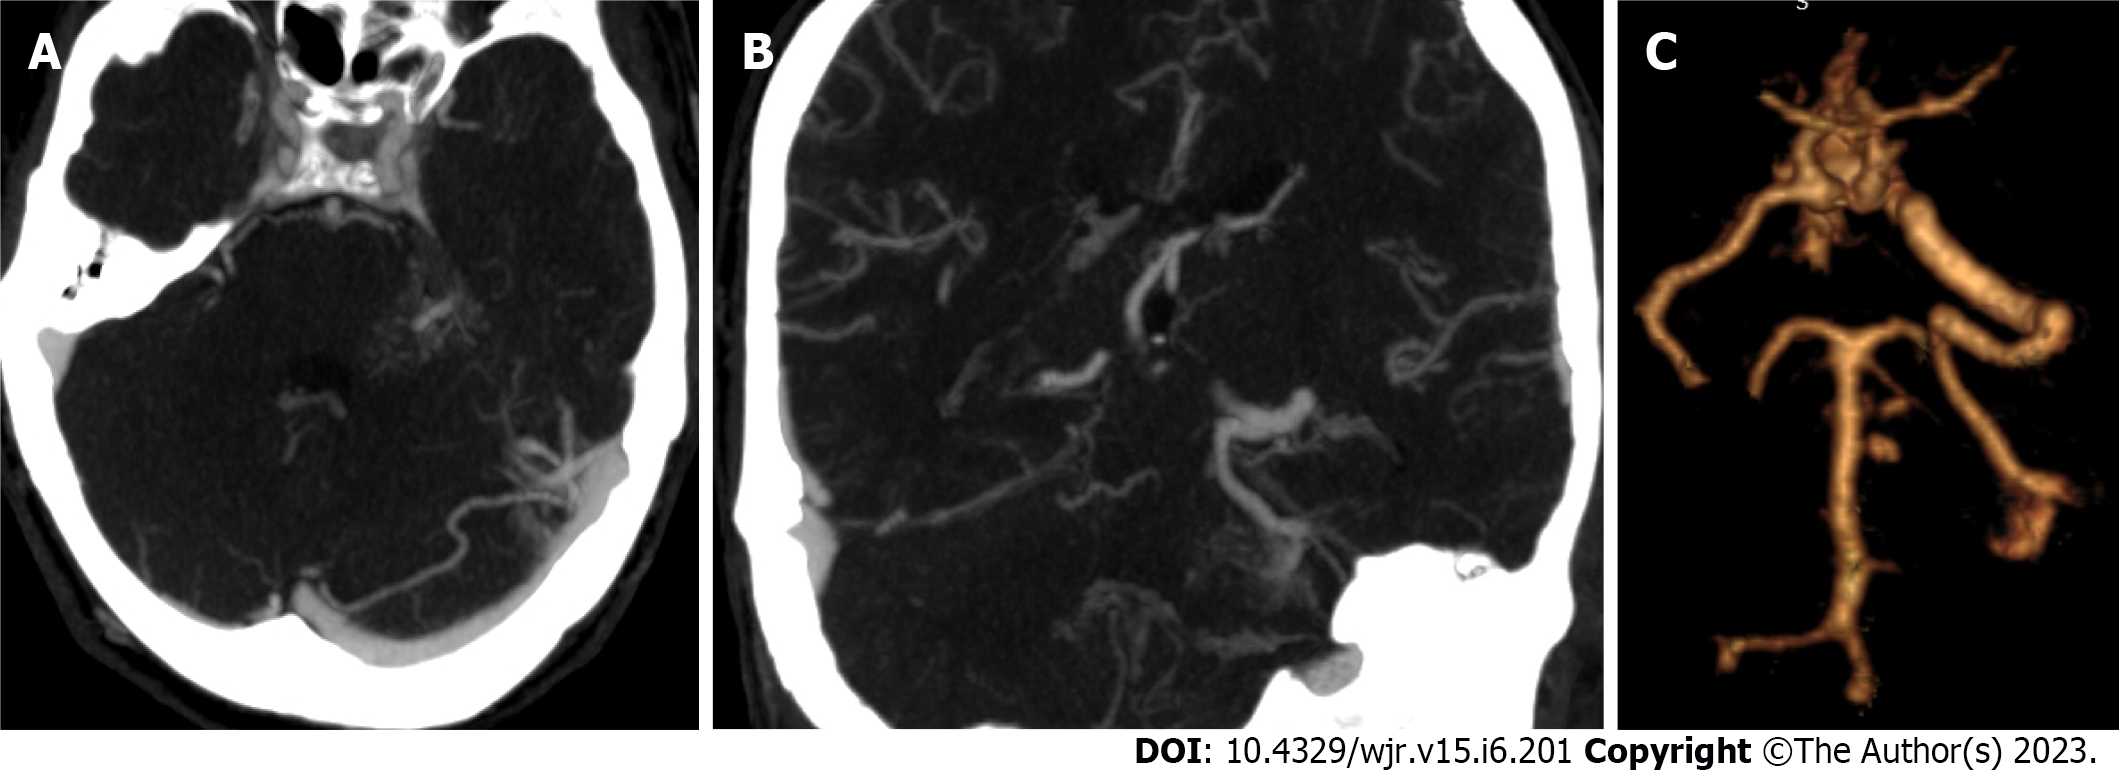 Imaging Evaluation of SAH and Aneurysm